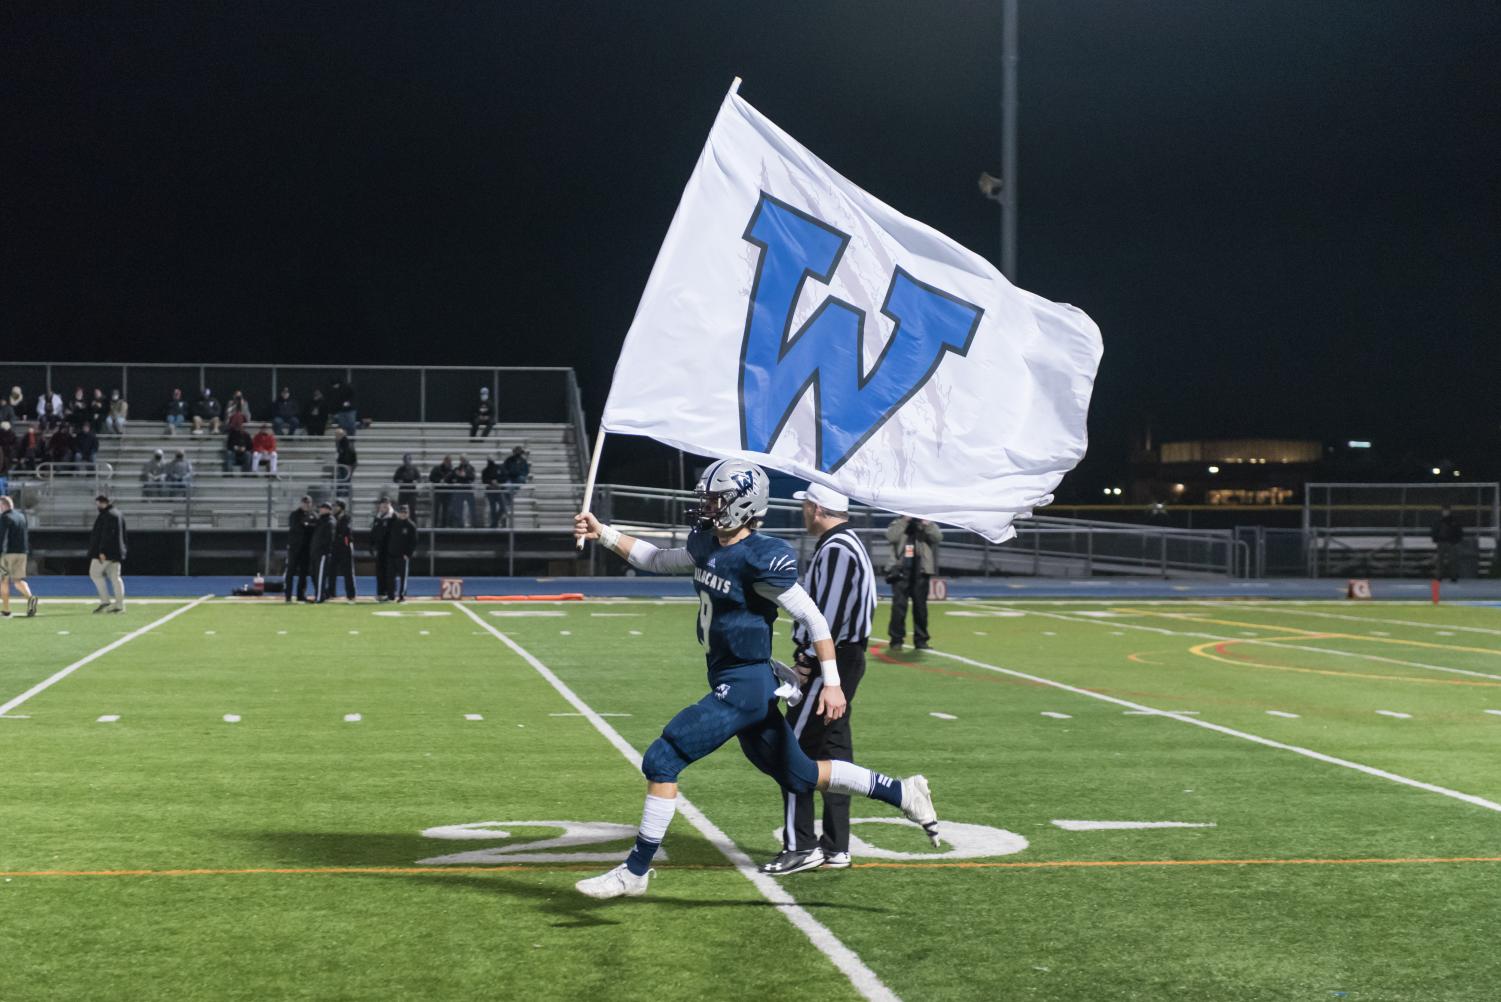 Team spirit is always lifted when the Wildcats fly their flag before a game.